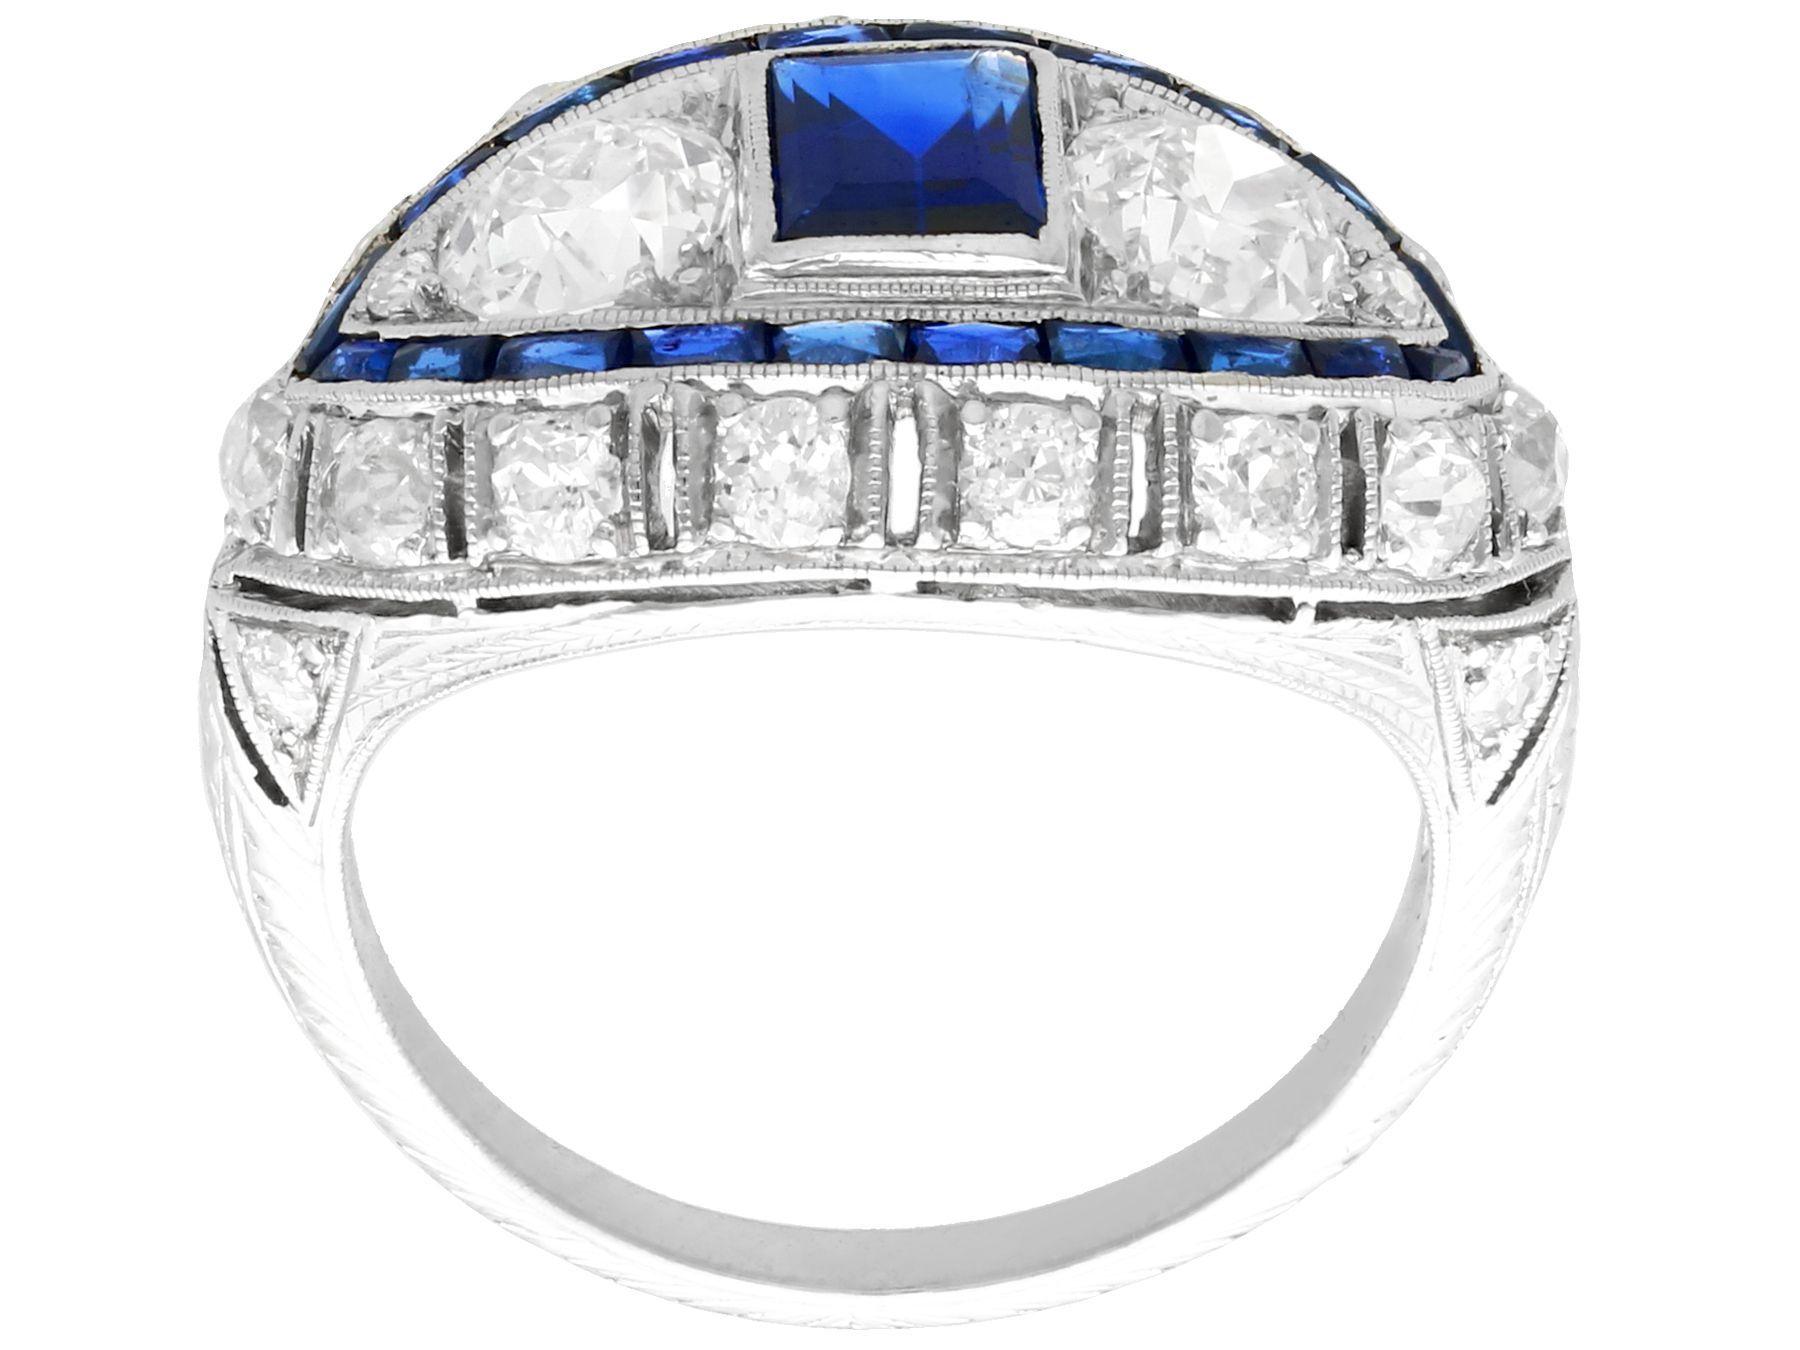 French Cut Art Deco 1.10 Carat Sapphire and 2.45 Carat Diamond Platinum Cocktail Ring For Sale